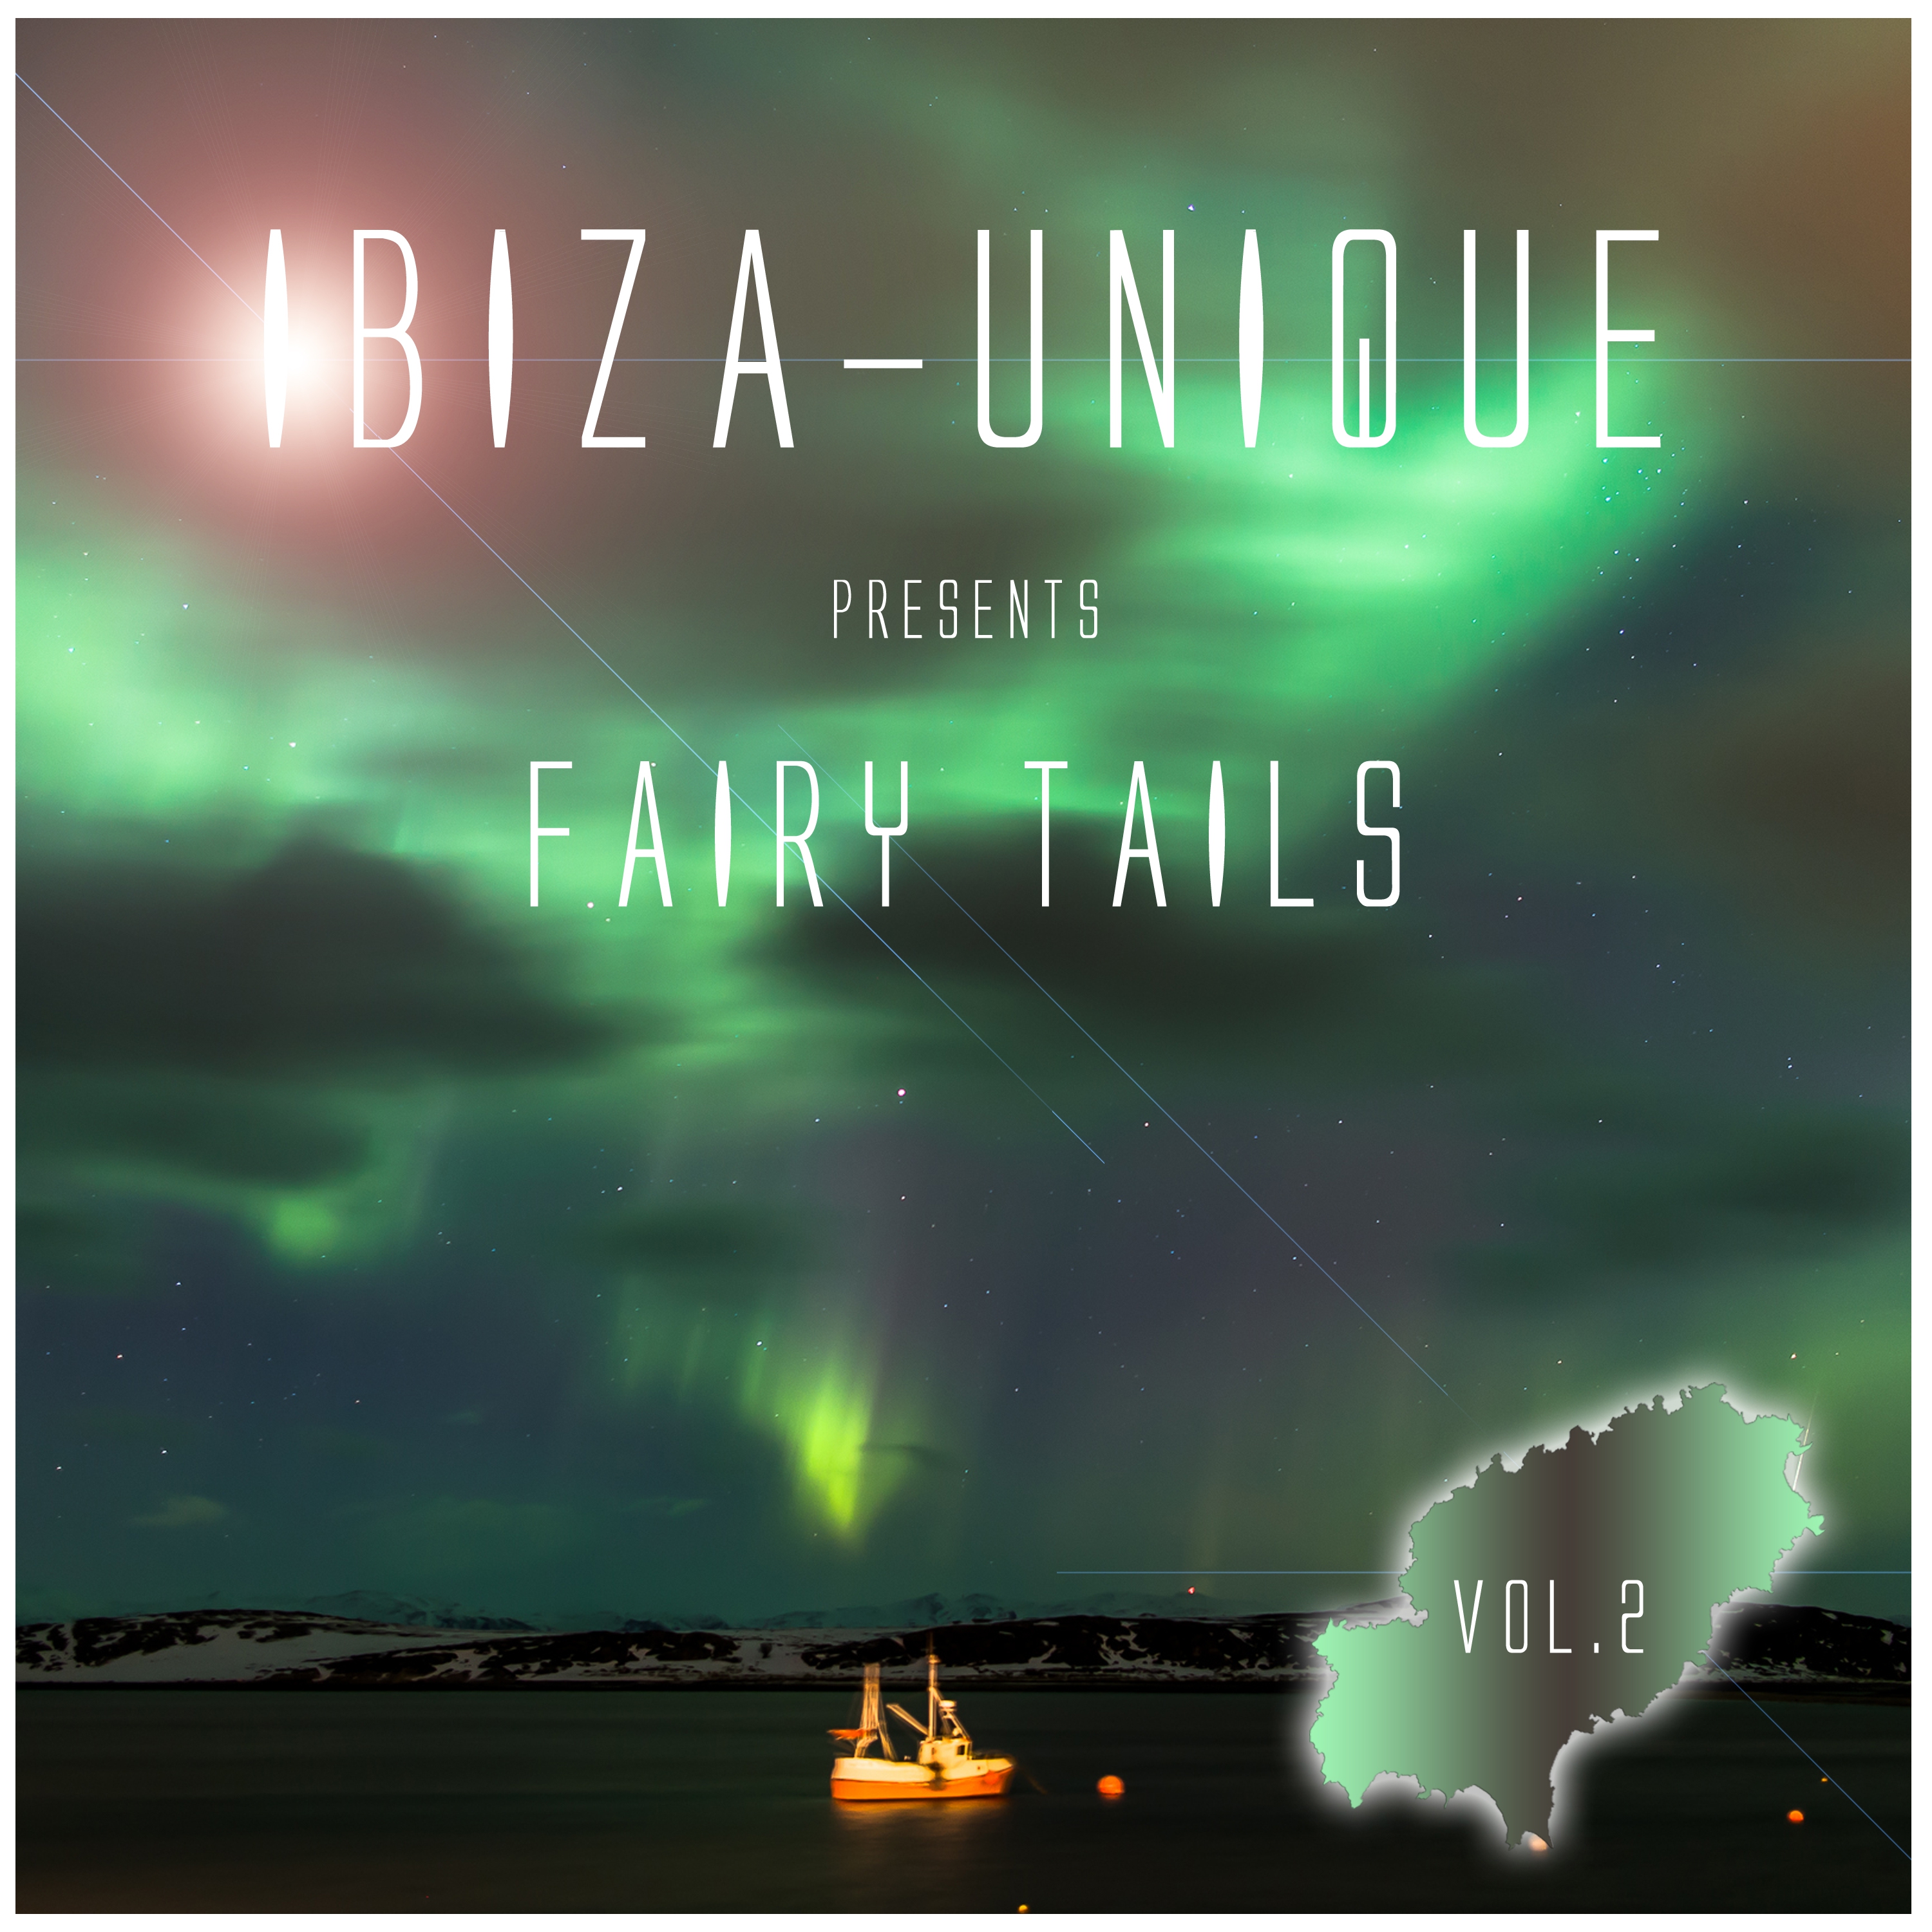 Ibiza-Unique Pres. Fairy Tails, Vol. 2 (Mixed By Nightmosphere) [Continuous DJ Mix]